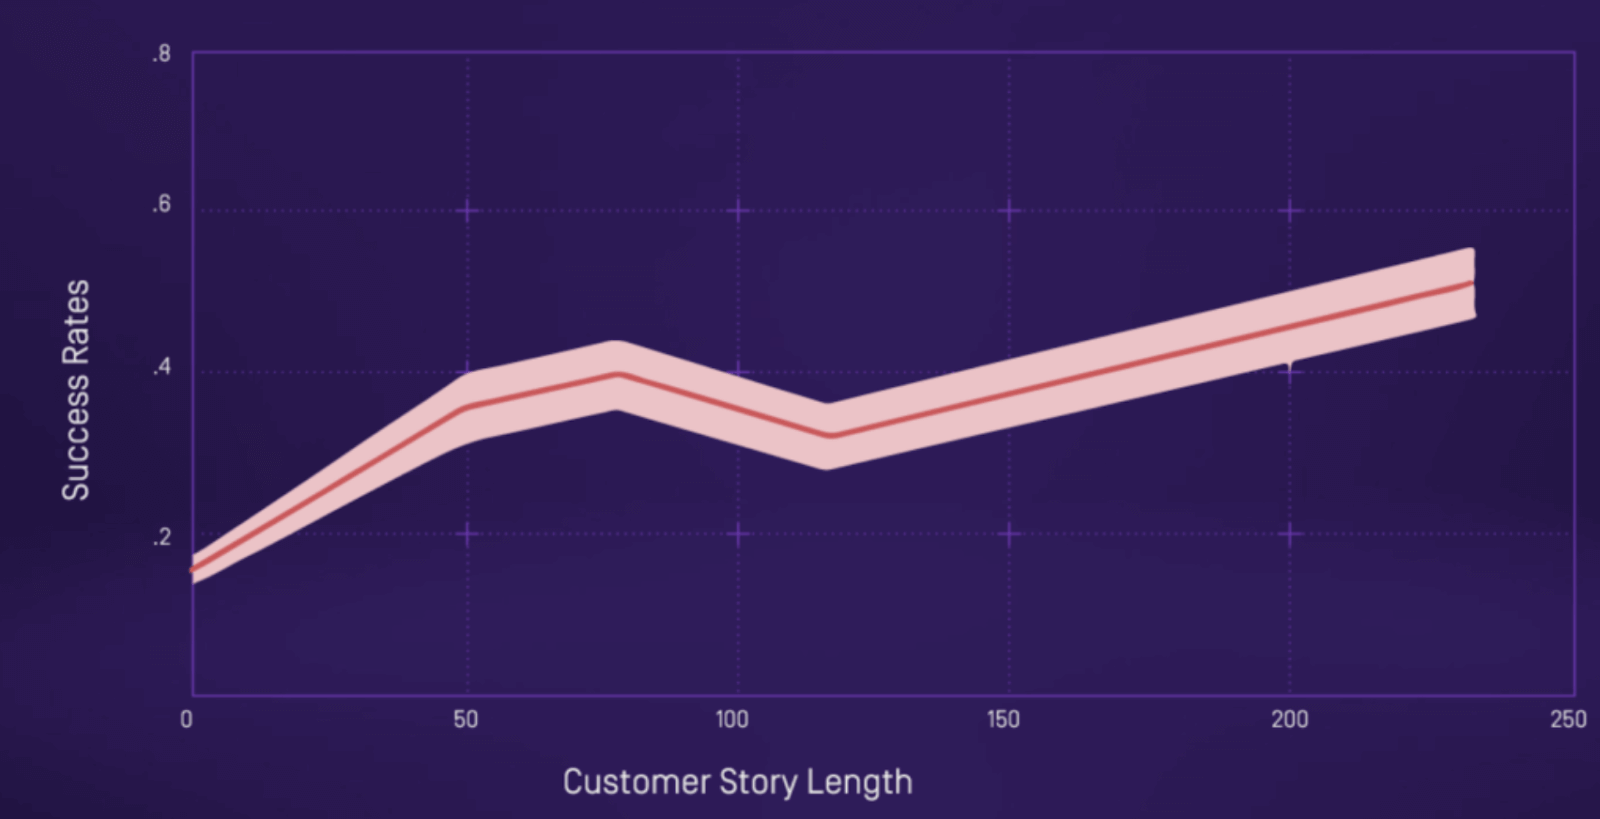 Customer story length correlated to higher success rates